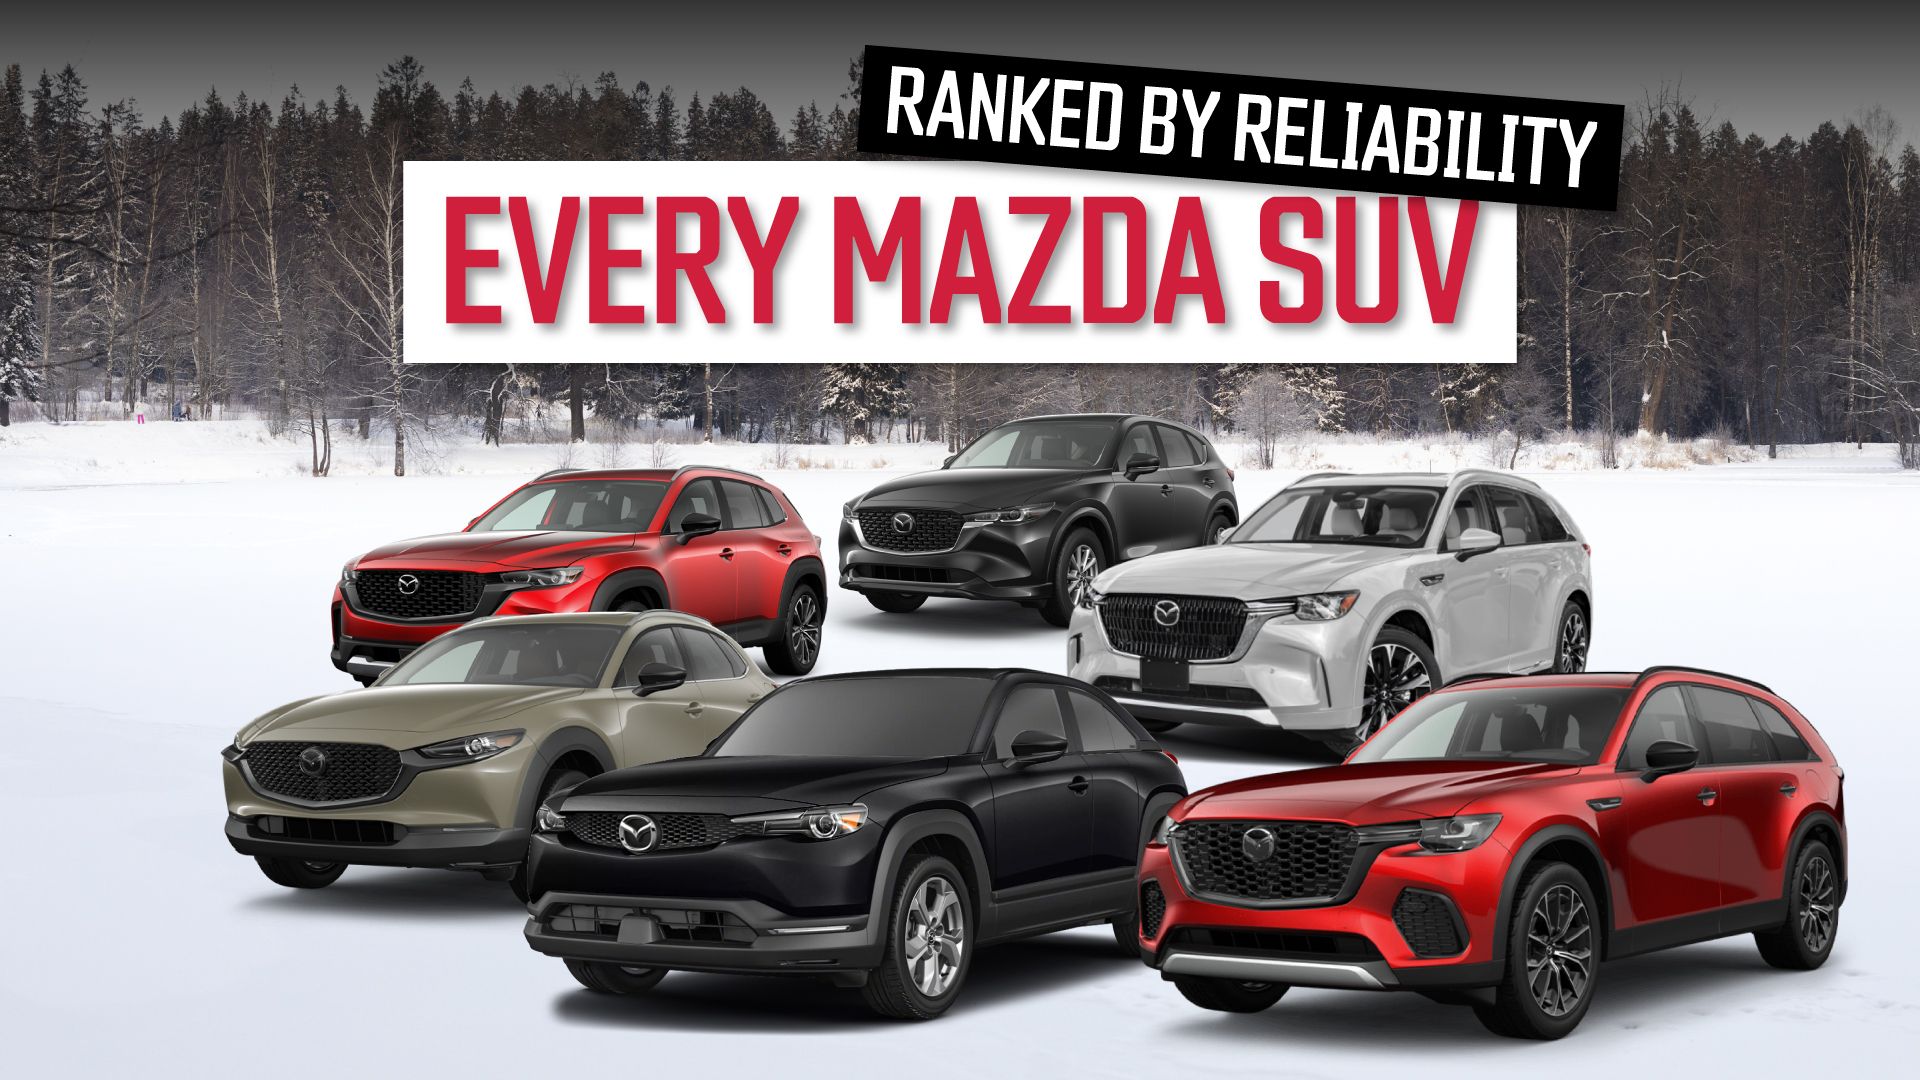 Ranking-Every-Mazda-SUV-By-Reliability